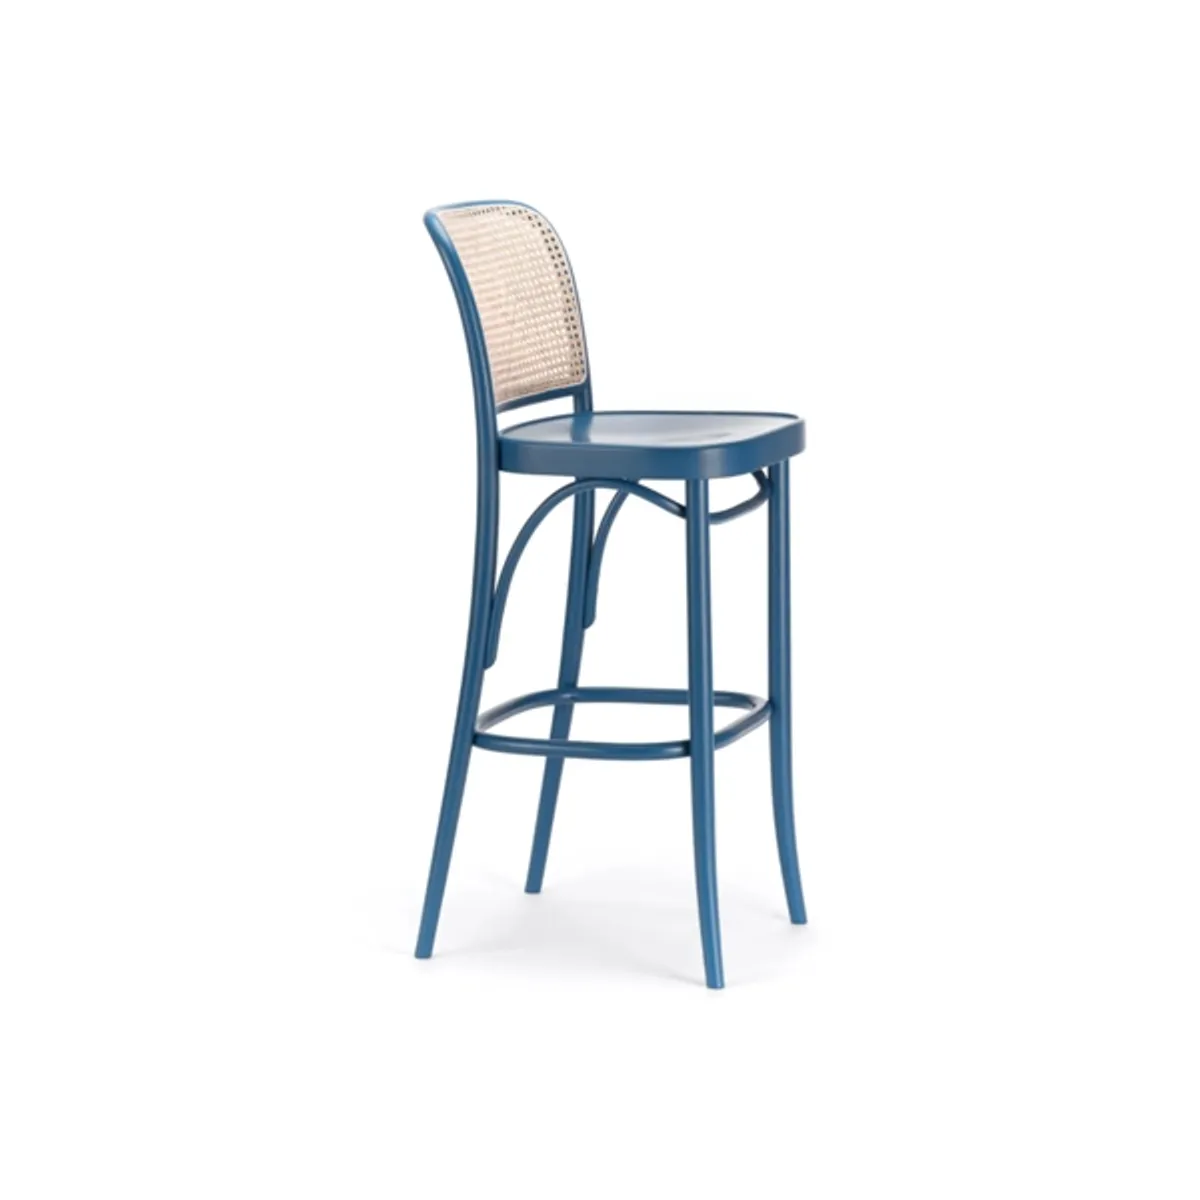 Bombay wood bar stool Inside Out Contracts4